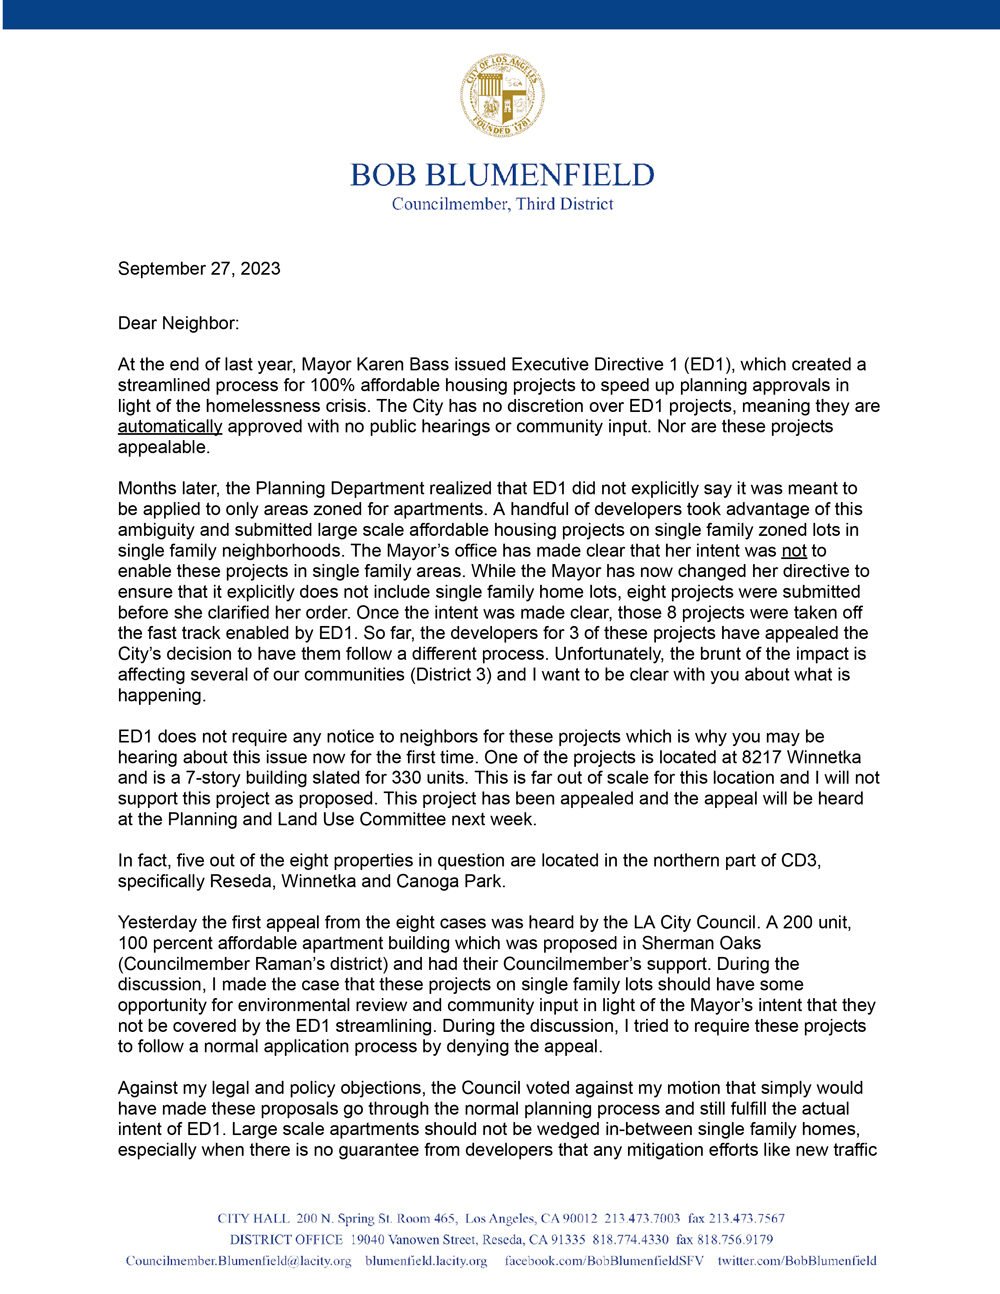 Letter from the Councilmember